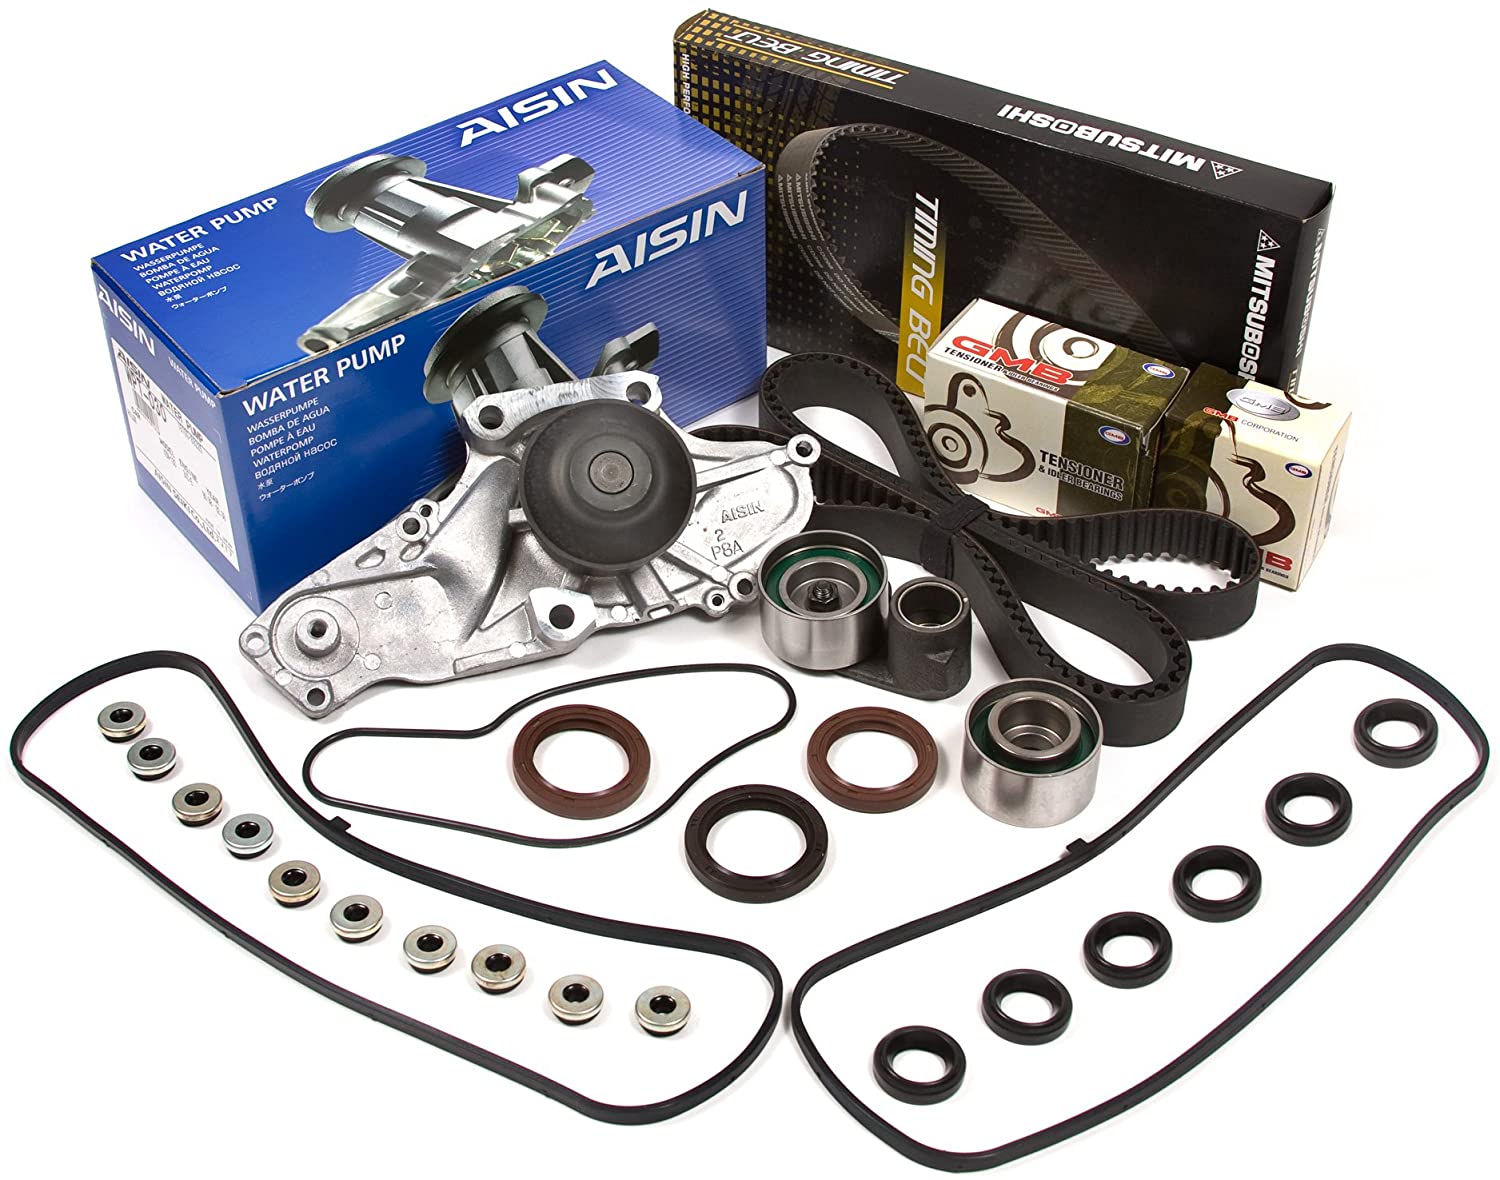 Evergreen TBK286MVCA Compatible With 97-03 Acura TL CL Honda Accord Odyssey J30A J32A J35A Timing Belt Kit Valve Cover Gasket AISIN Water Pump